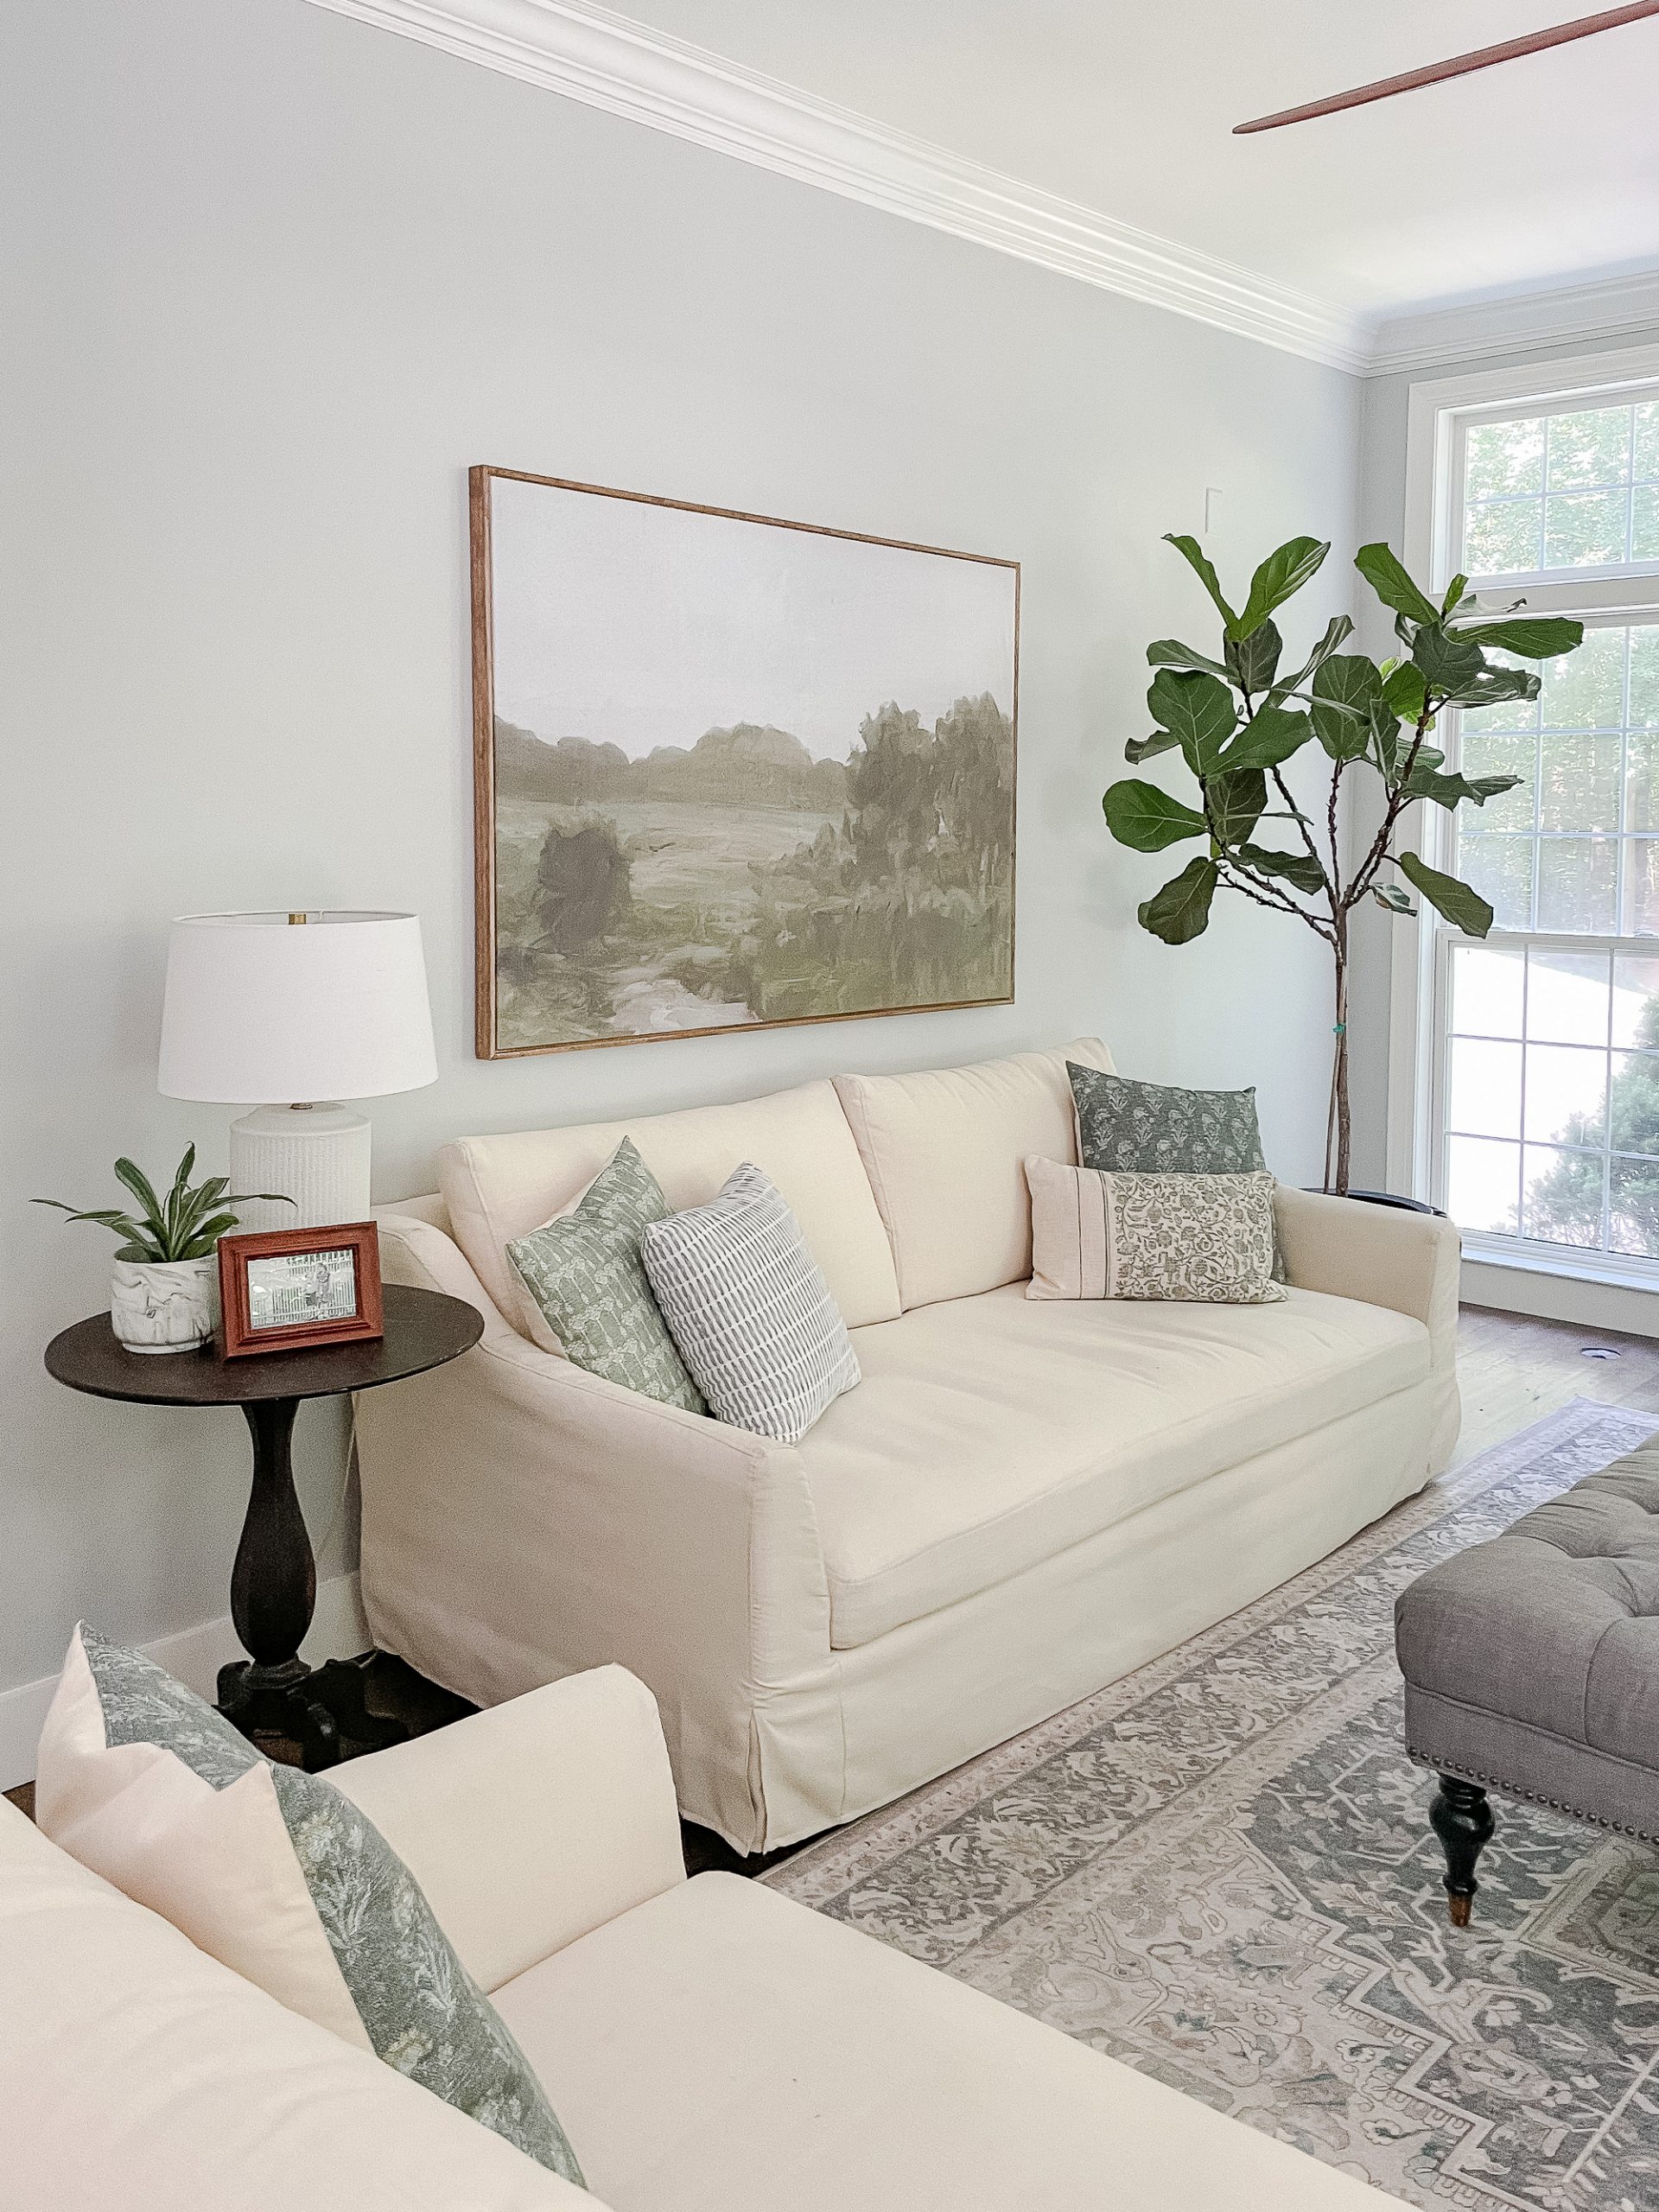 decorate a large wall in Family room with large art above sofa, fiddle leaf tree next to a window. 